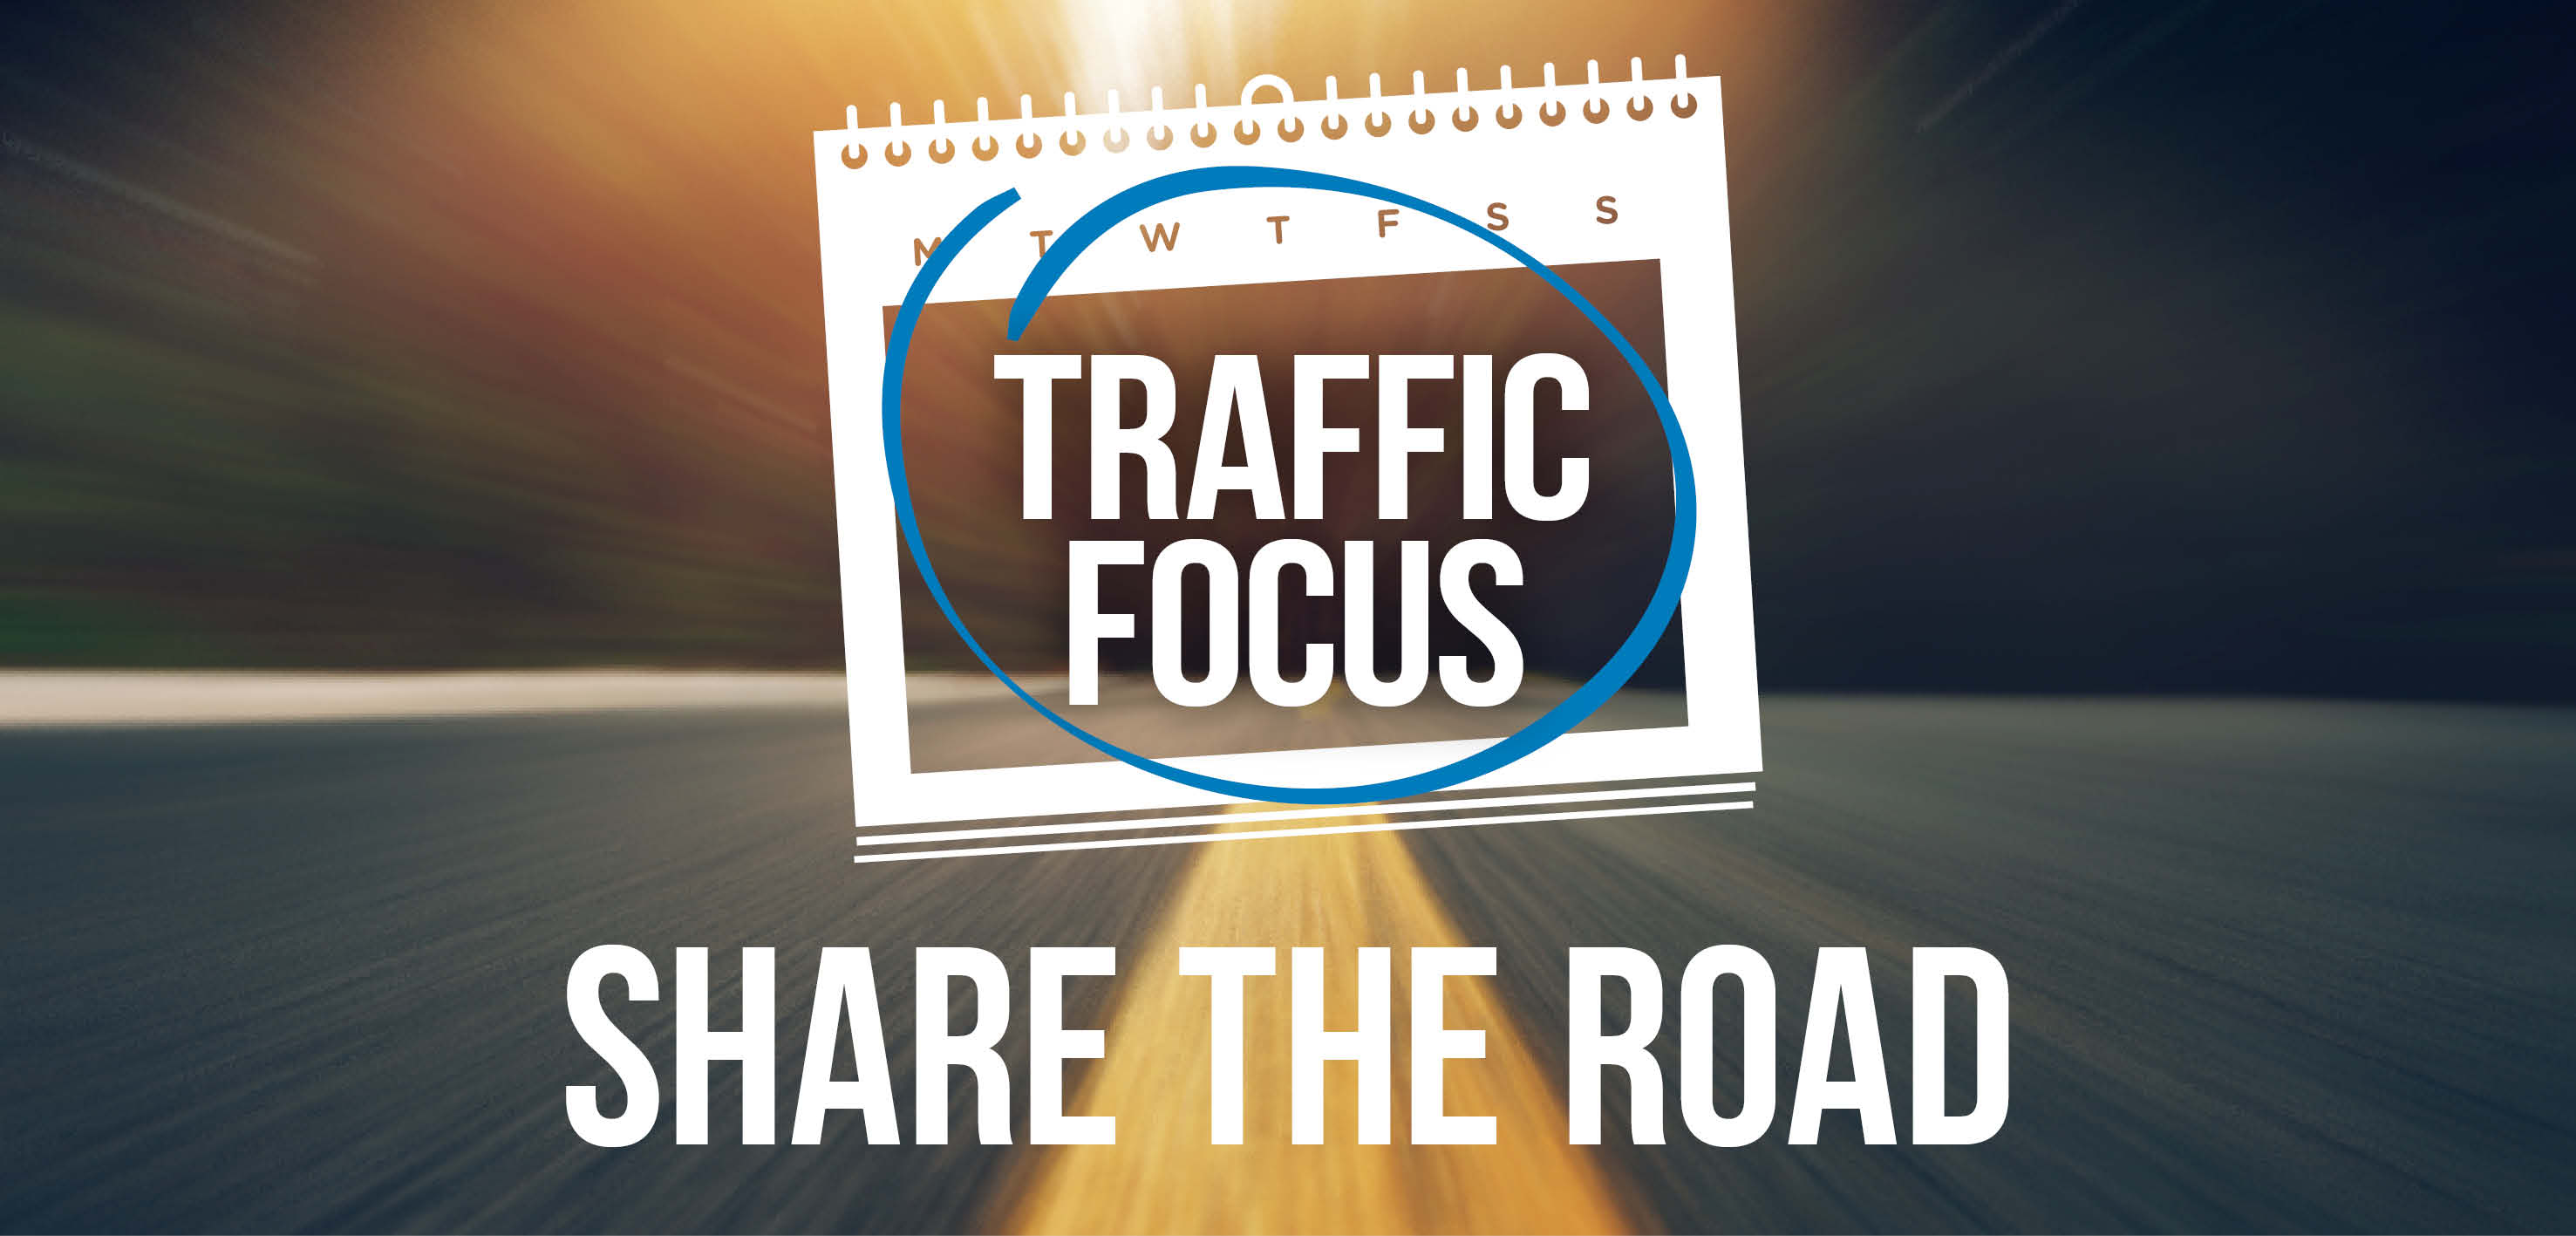 Share the road slow to 40kms - October Traffic Focus 